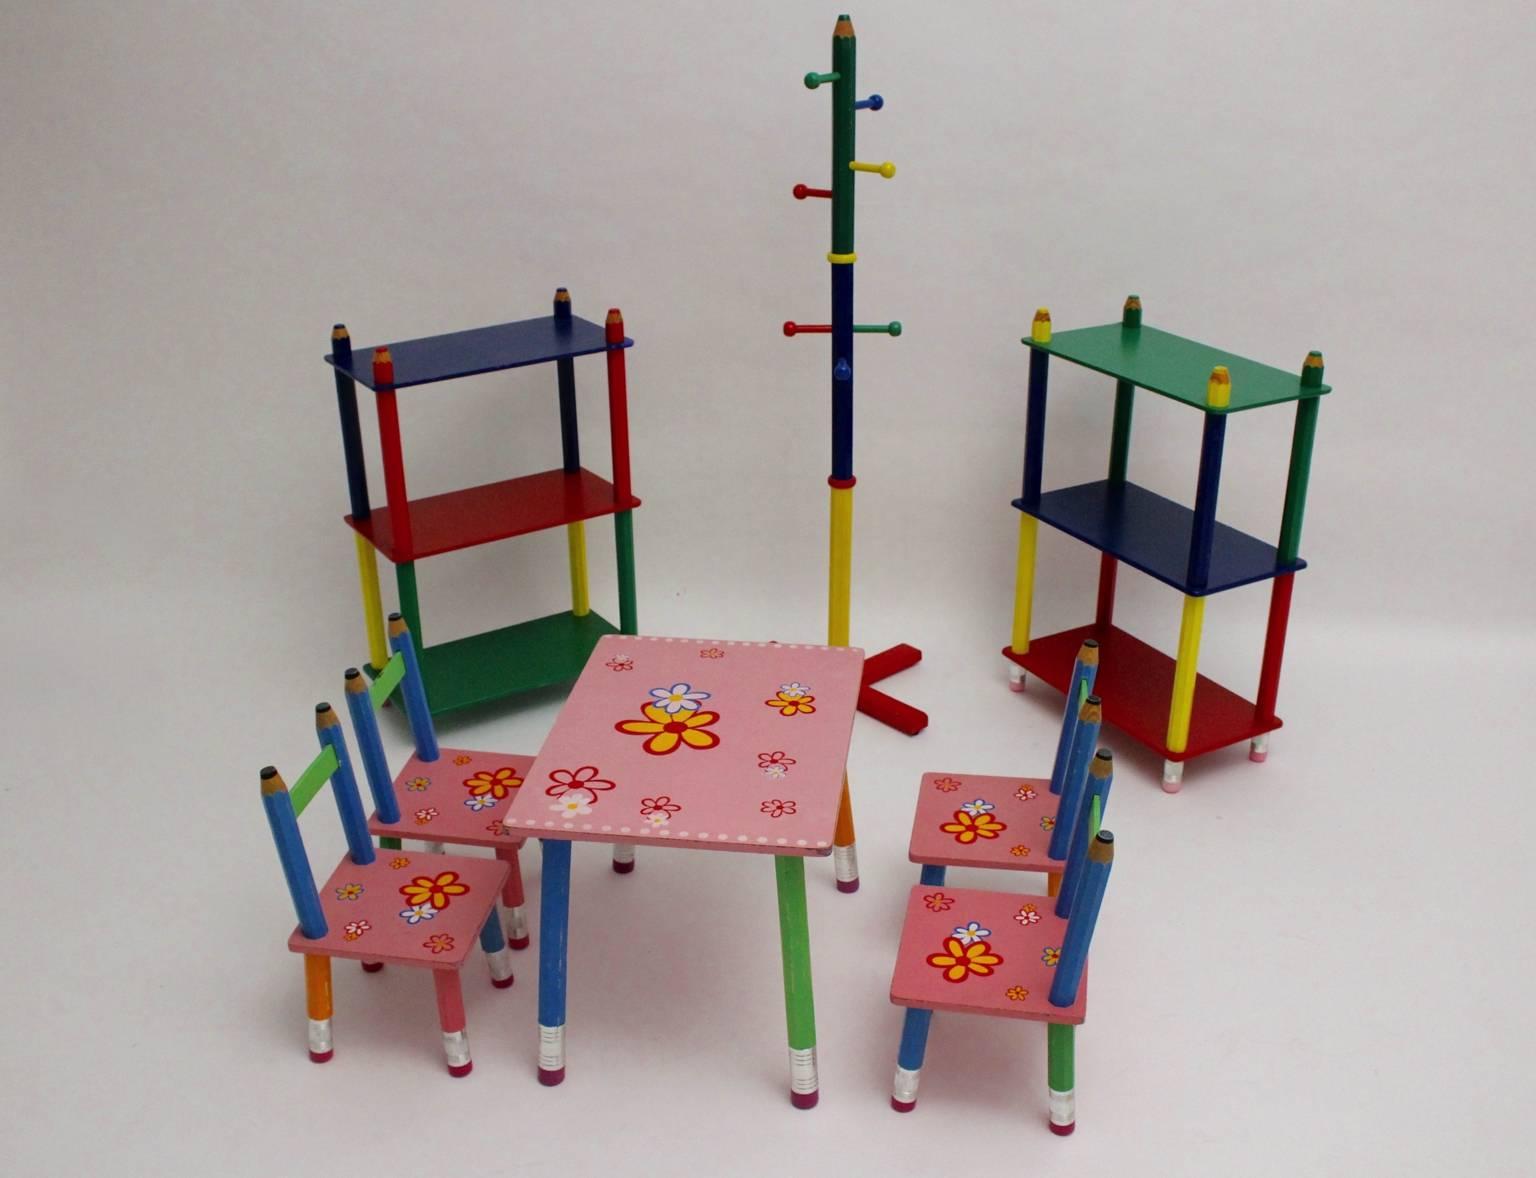 Postmodern vintage multicolored children sitting room set. The set consists of one table, four chairs,pair of wall shelves and a coatrack in the colors pink, green, blue, red and yellow.
Designed by Pierre Sala, France (1948-1989) in the 1980s, and